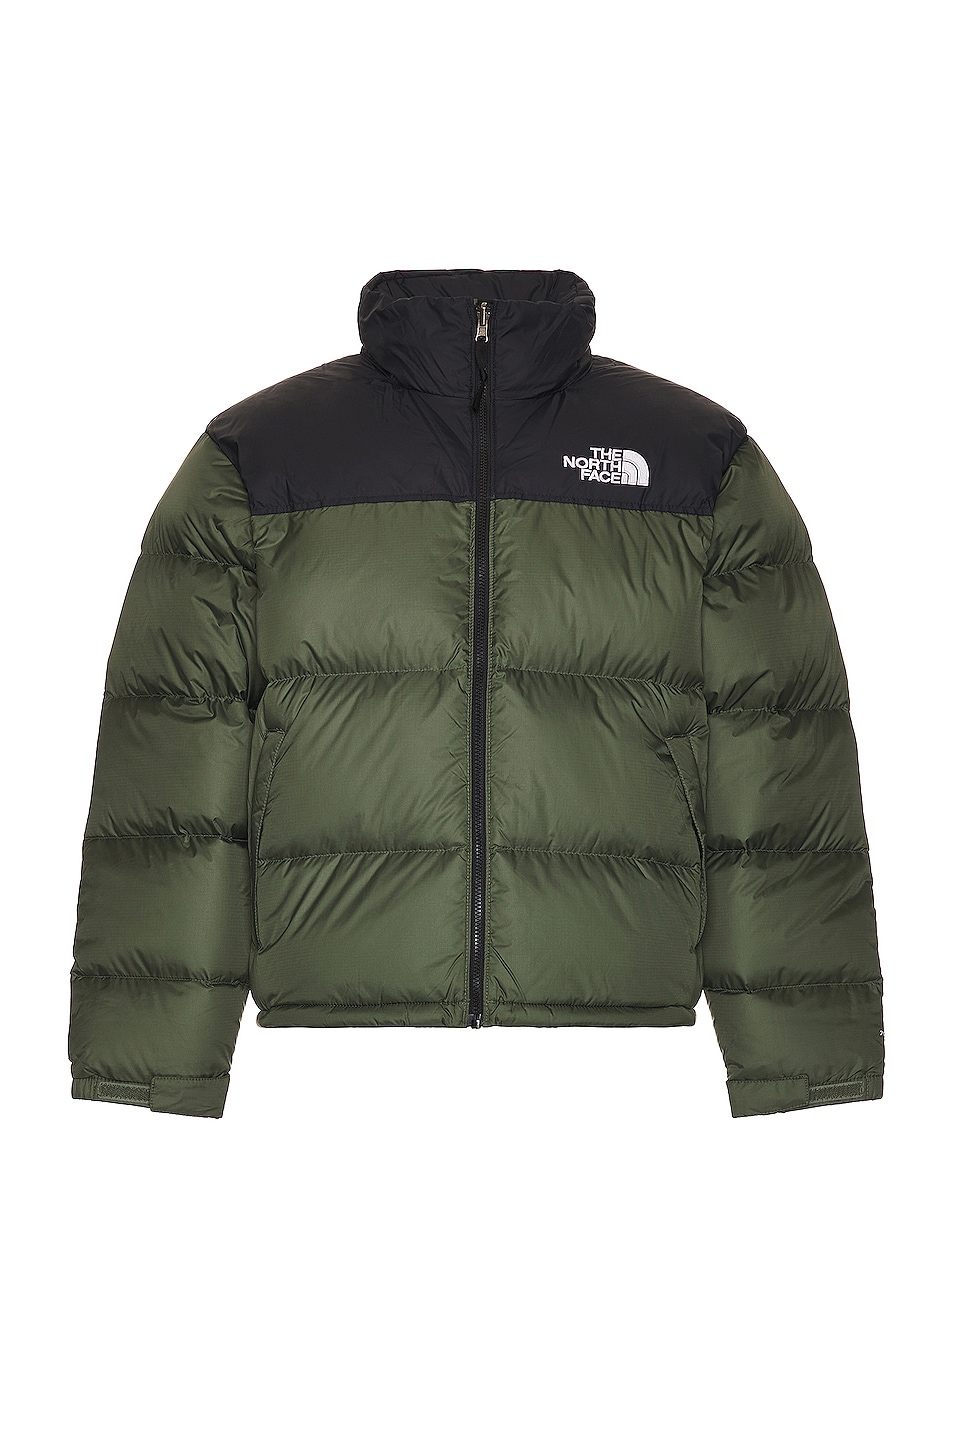 Image 1 of The North Face 1996 Retro Nuptse Jacket in Thyme